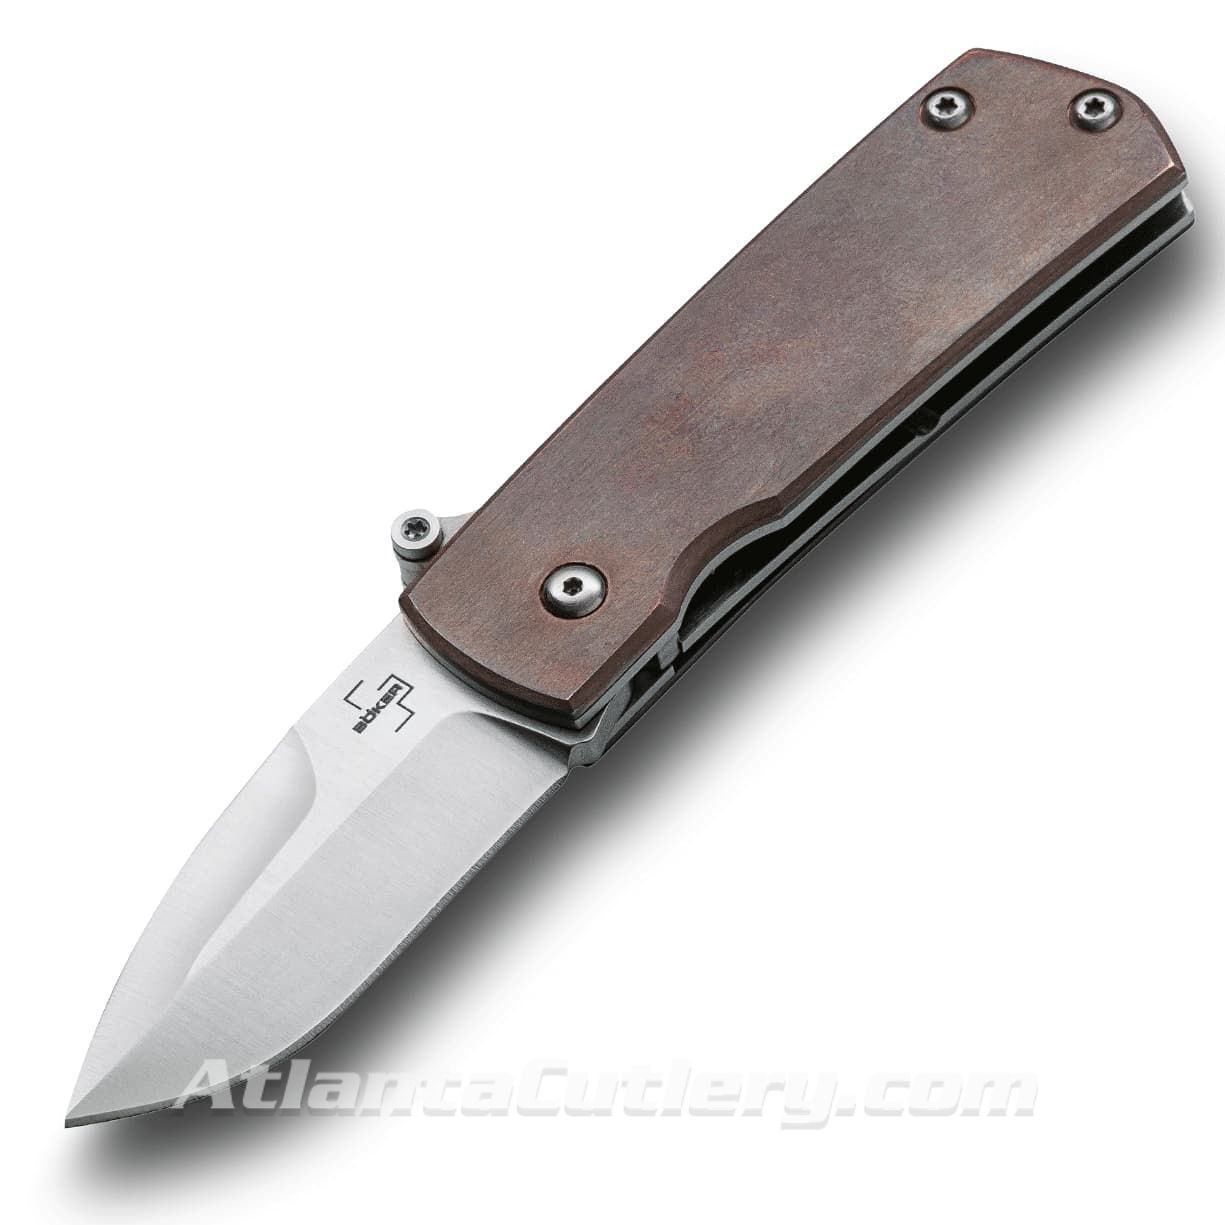 Boker Plus Shamsher automatic pocket knife with D2 steel blade, copper scales, legal in all 50 states